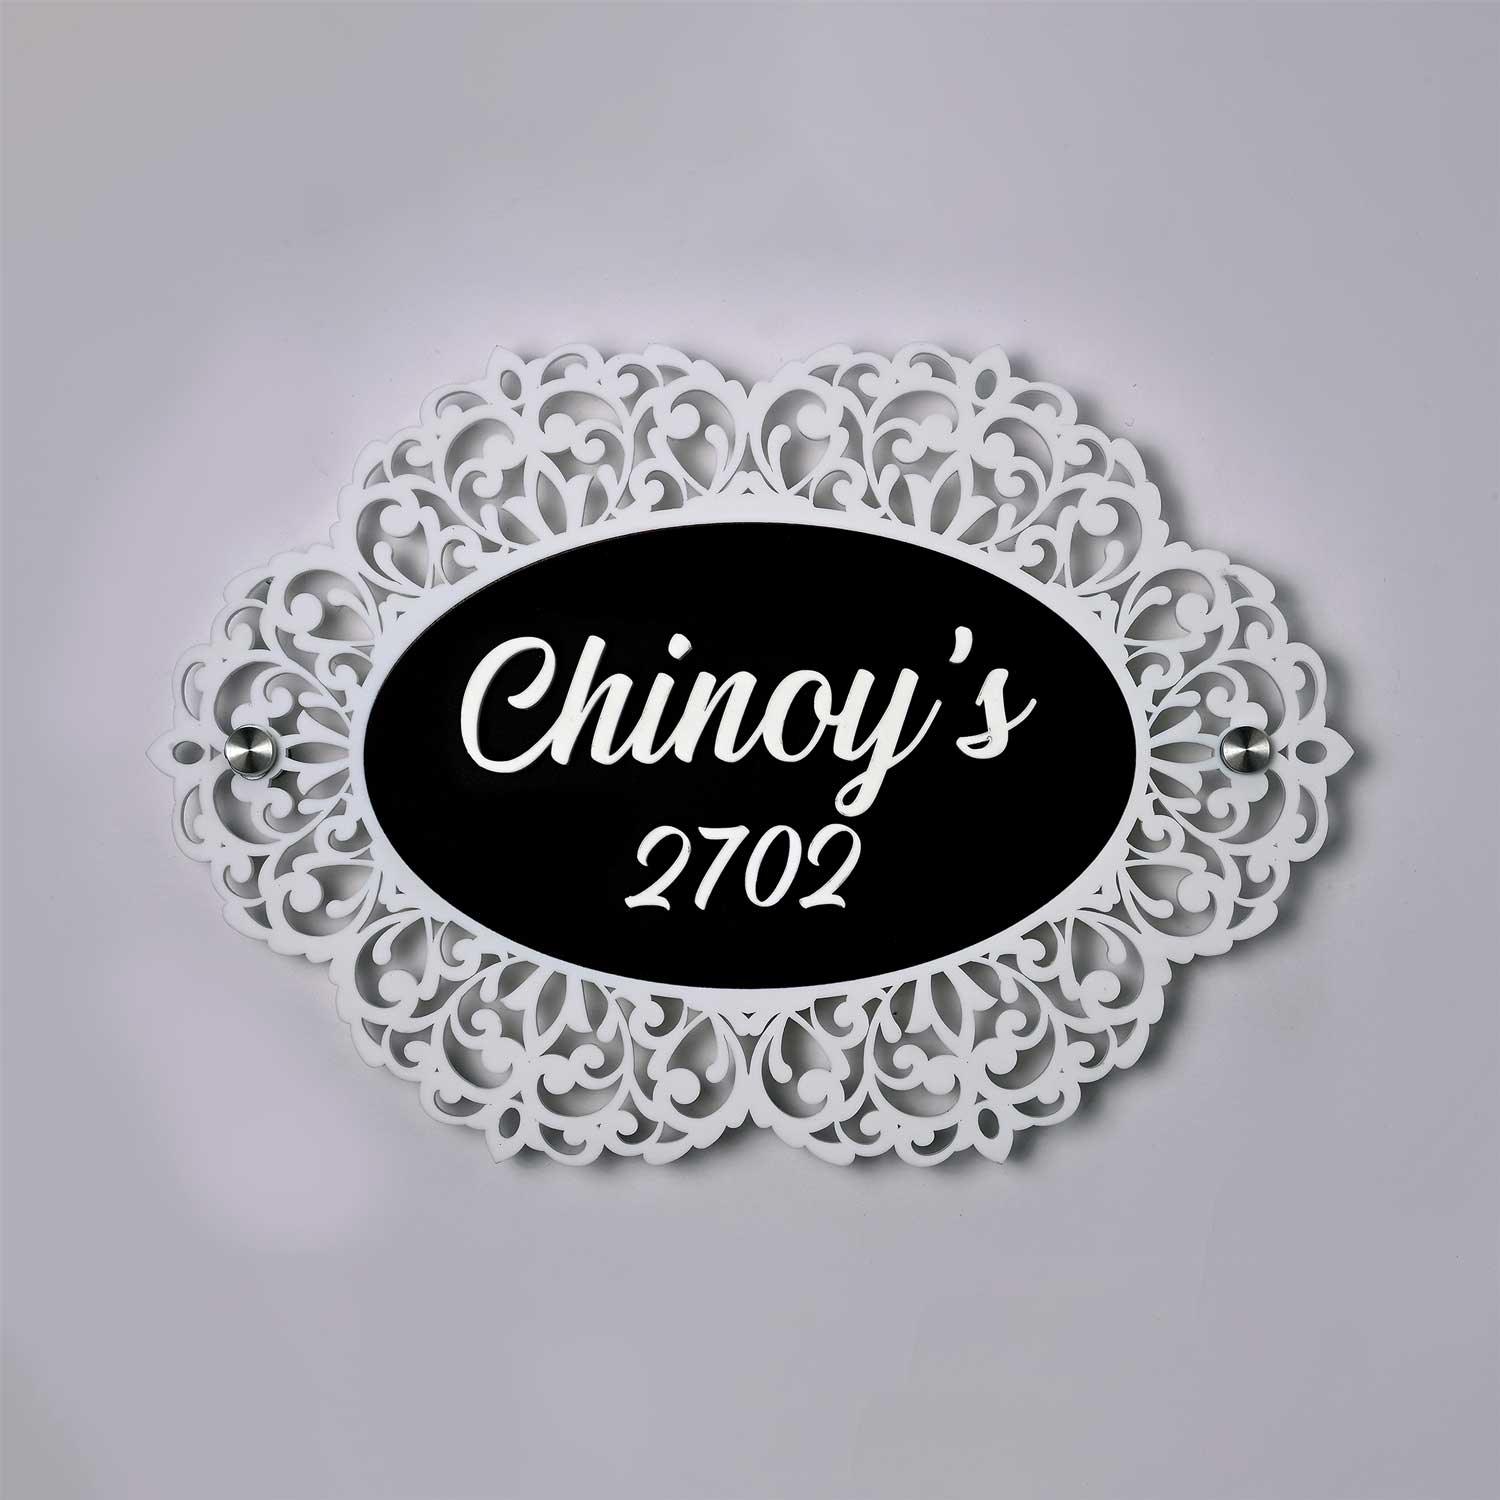 Chinoy's - Acrylic Name Plate with Raised Lettering - Housenama